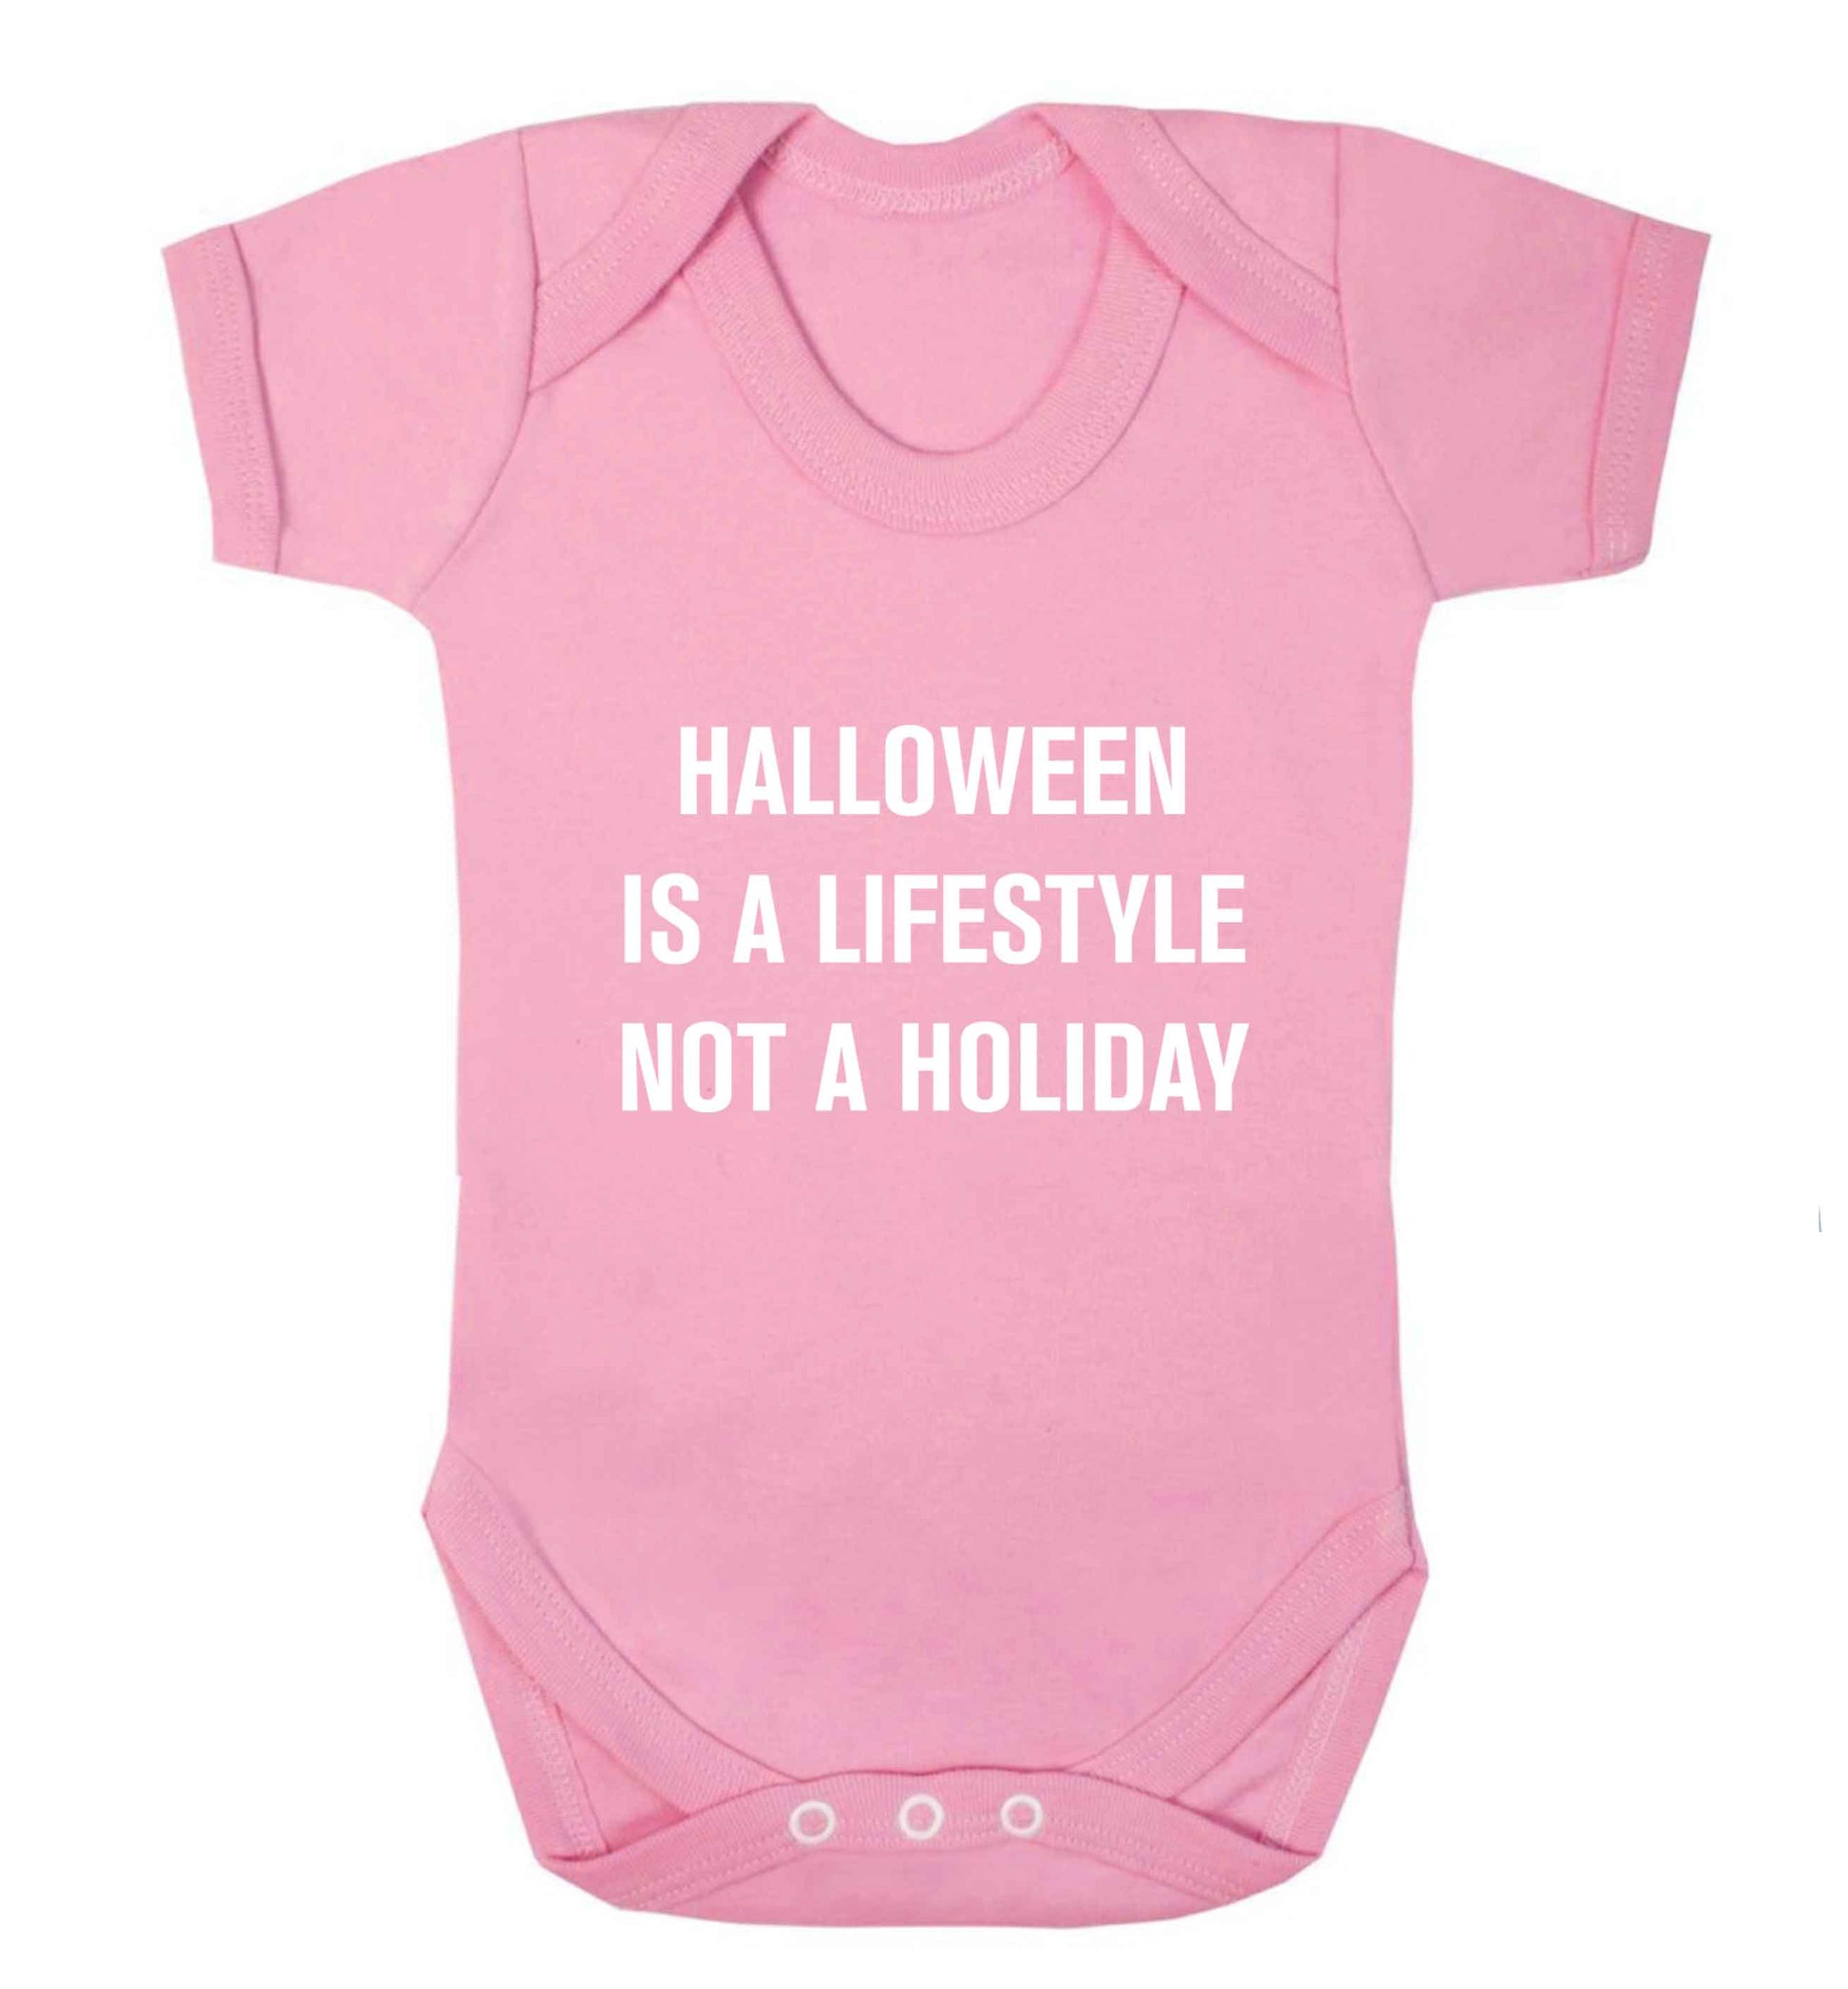 Halloween is a lifestyle not a holiday baby vest pale pink 18-24 months